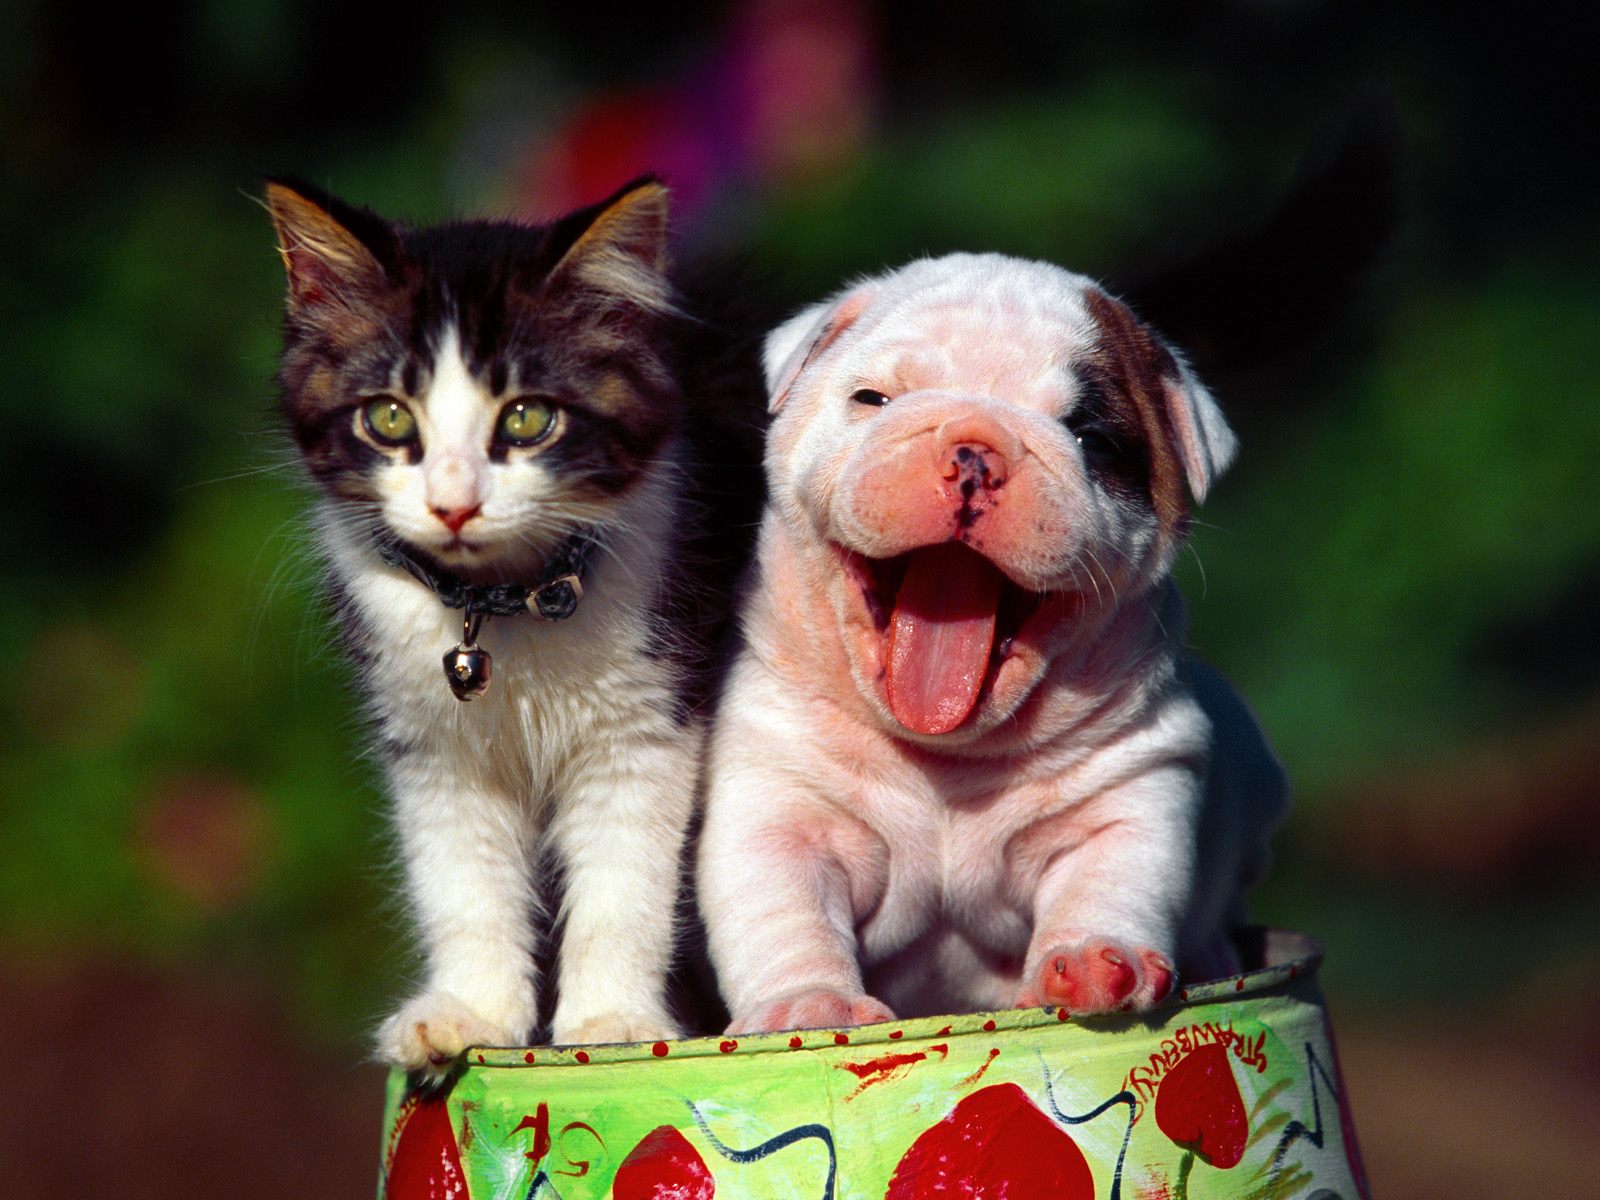 Cats and Dogs | Fun Animals Wiki, Videos, Pictures, Stories